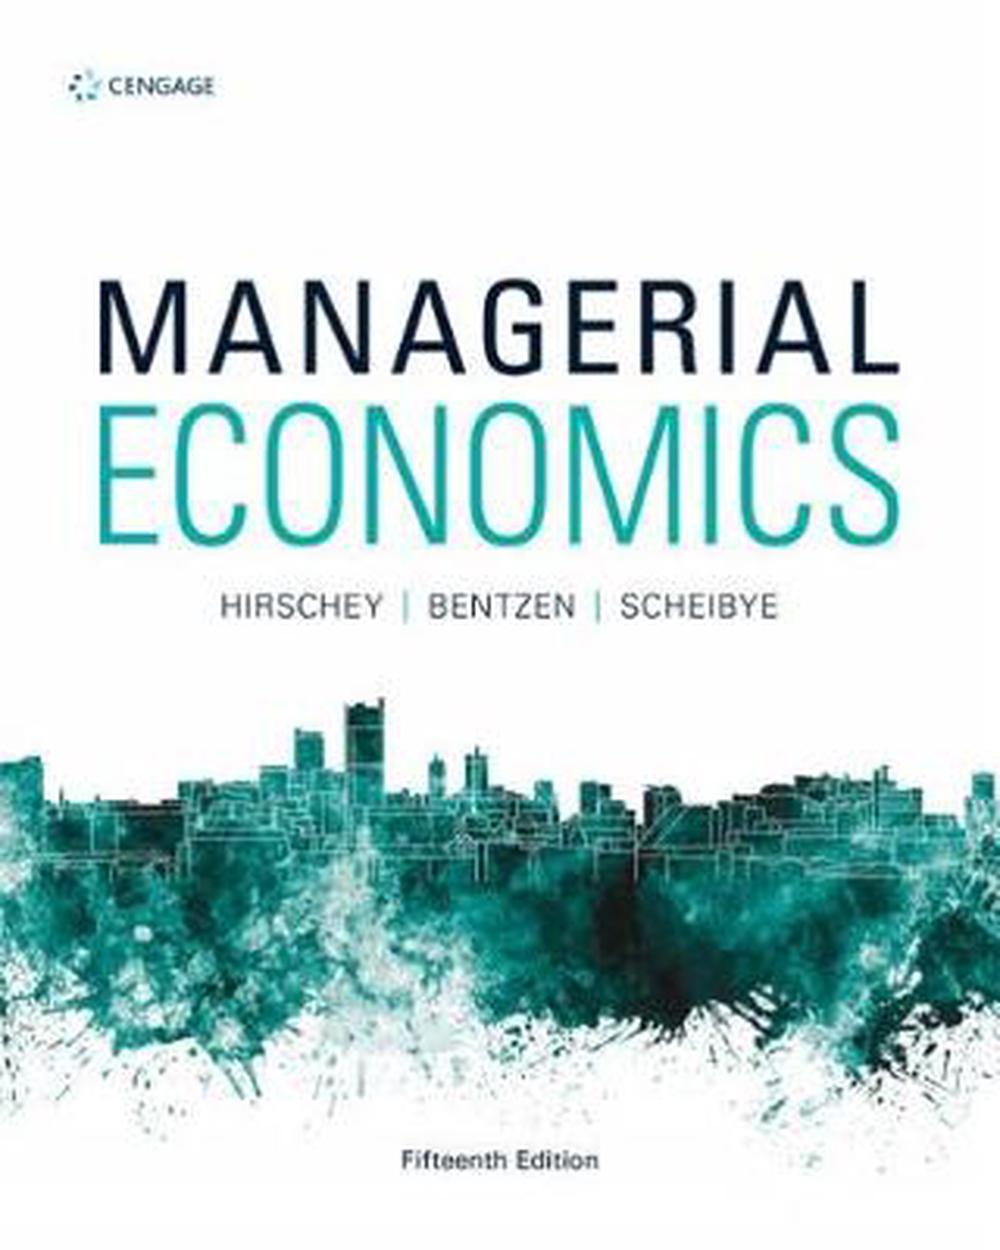 managerial economics article review